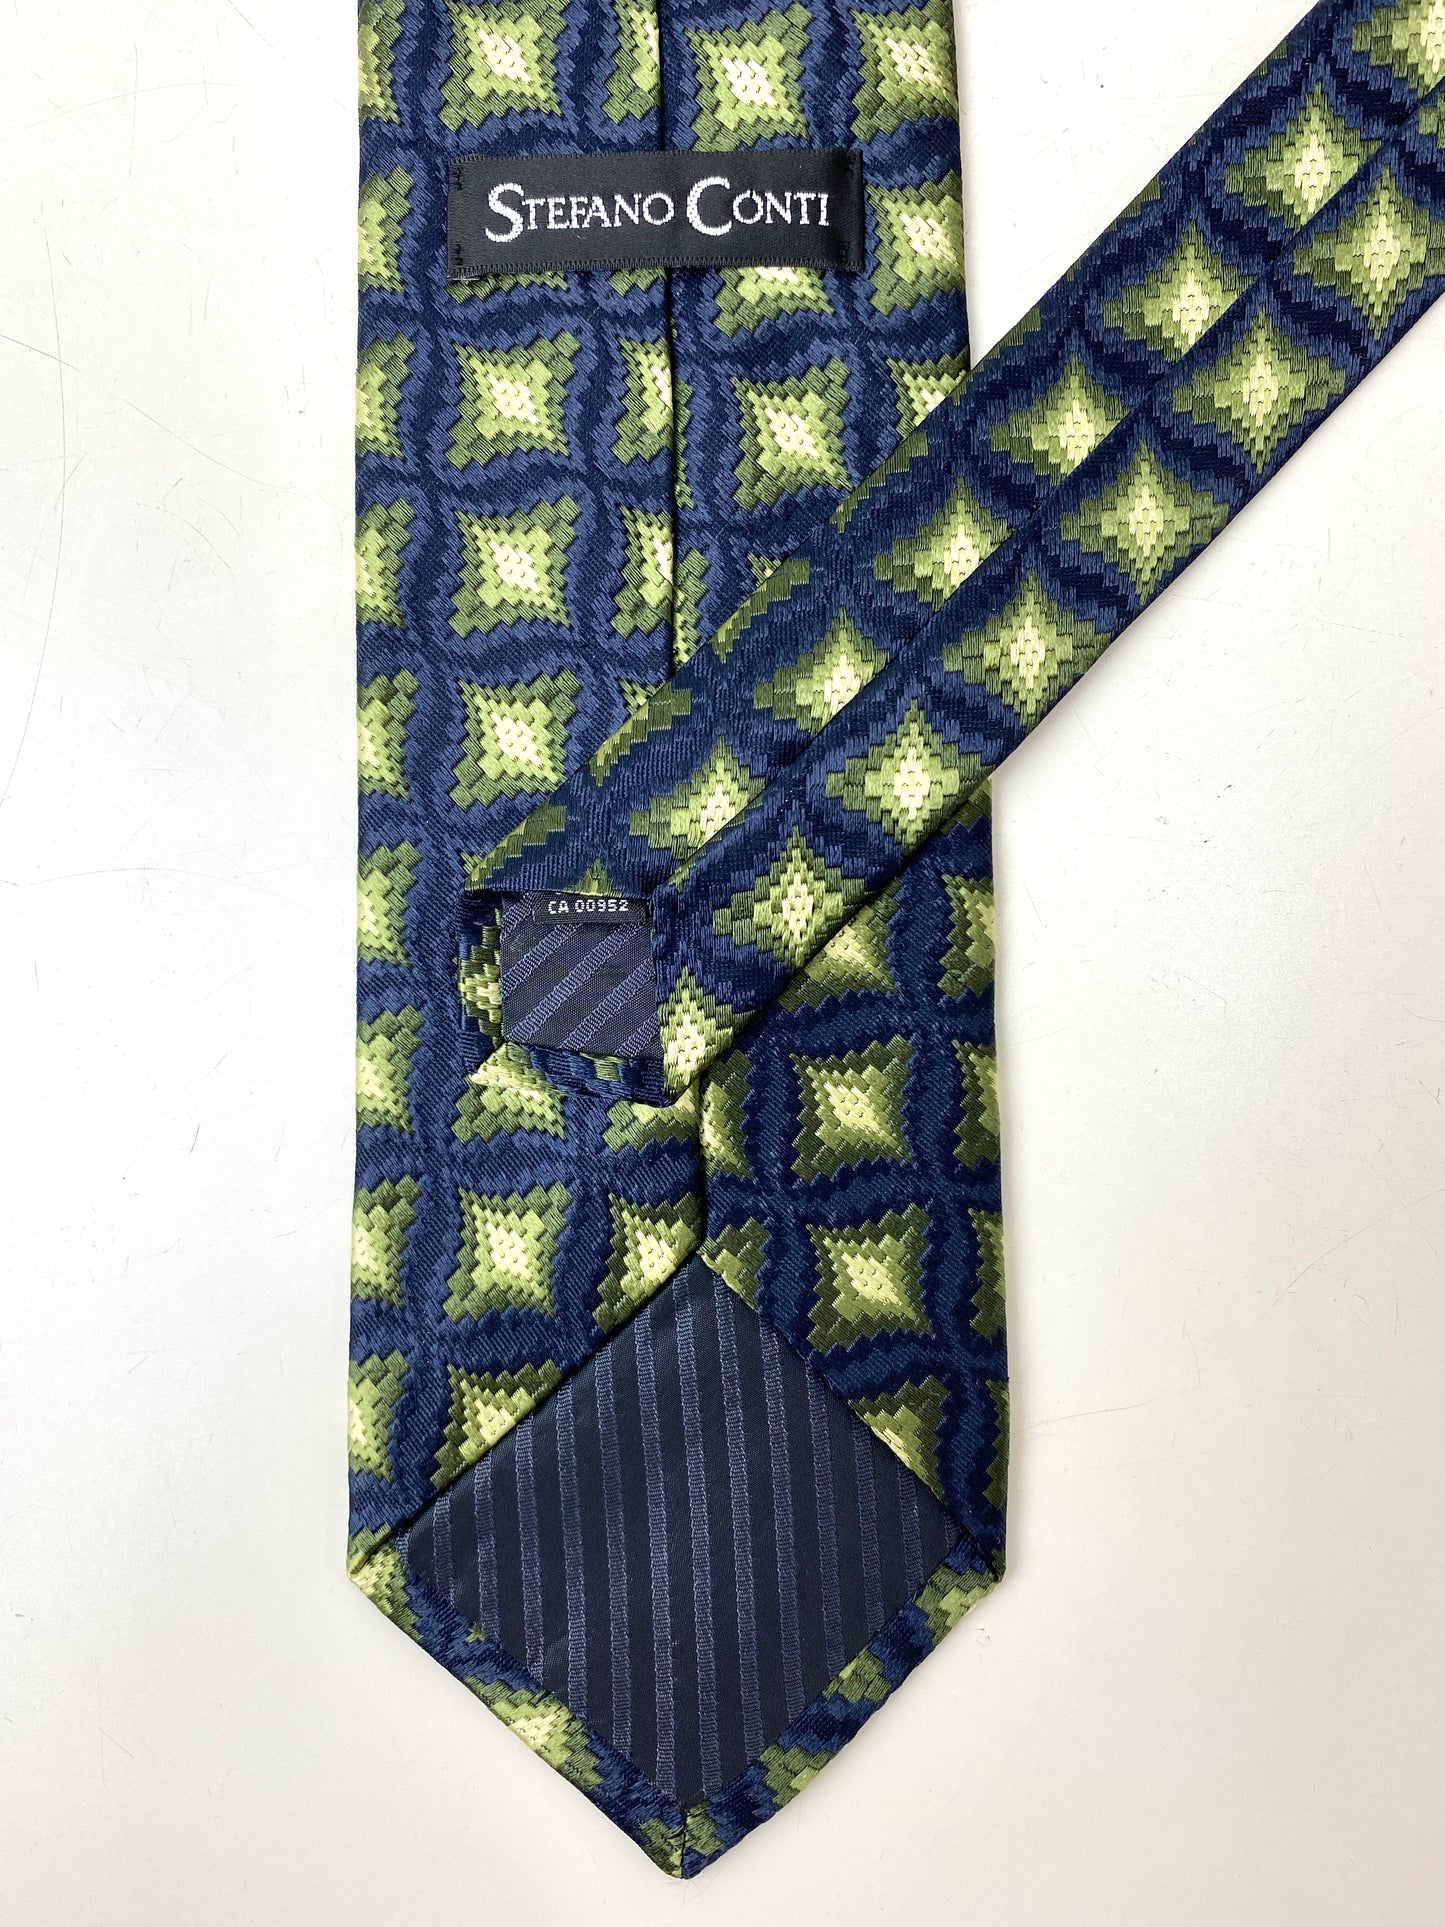 Back and labels of: 90s Deadstock Silk Necktie, Men's Vintage Green/ Navy Geometric Check Pattern Tie, NOS